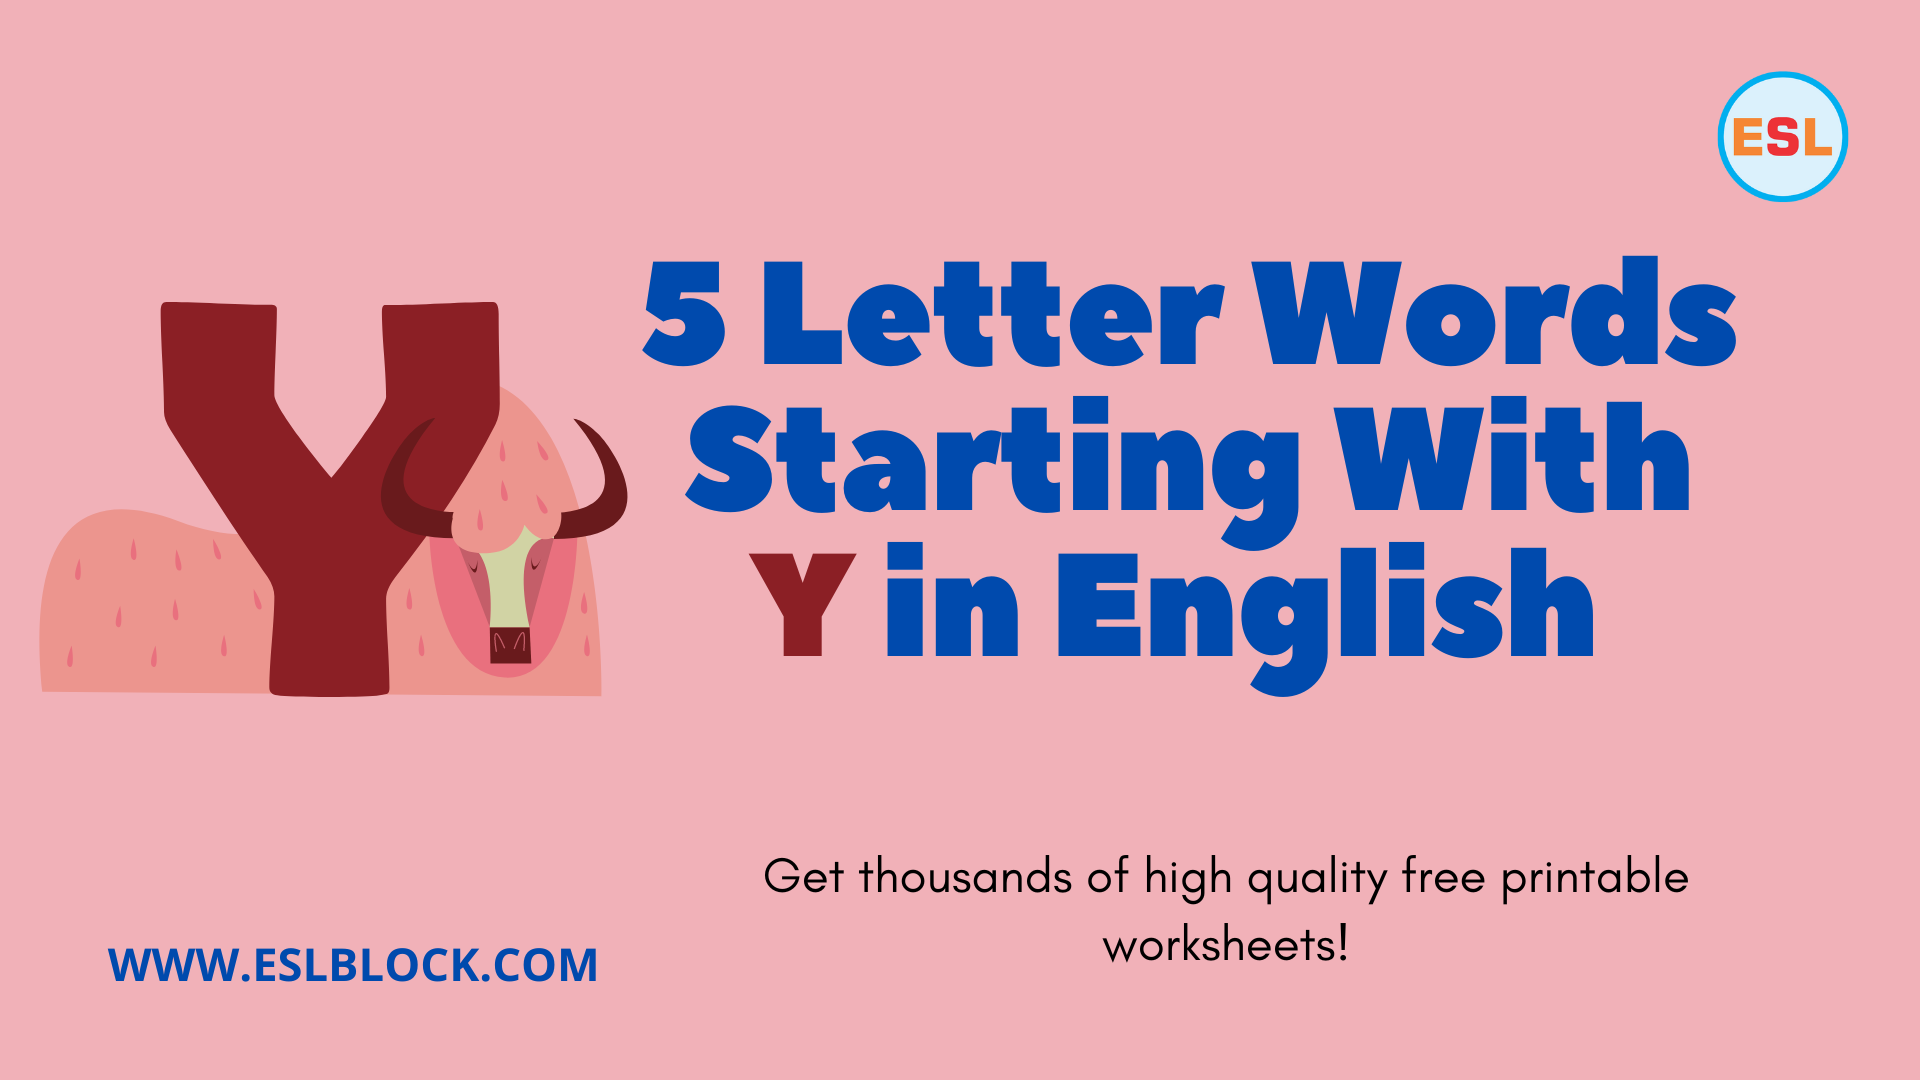 5 Letter Words, 5 Letter Words Starting With Y, 5 Letter Words That Start With Y, 5 Letter Words With Y, 5 Letter Y Words, English, English Grammar, English Vocabulary, English Words, List of 5 Letter Words, Vocabulary, Words That Start With Y, Y Words